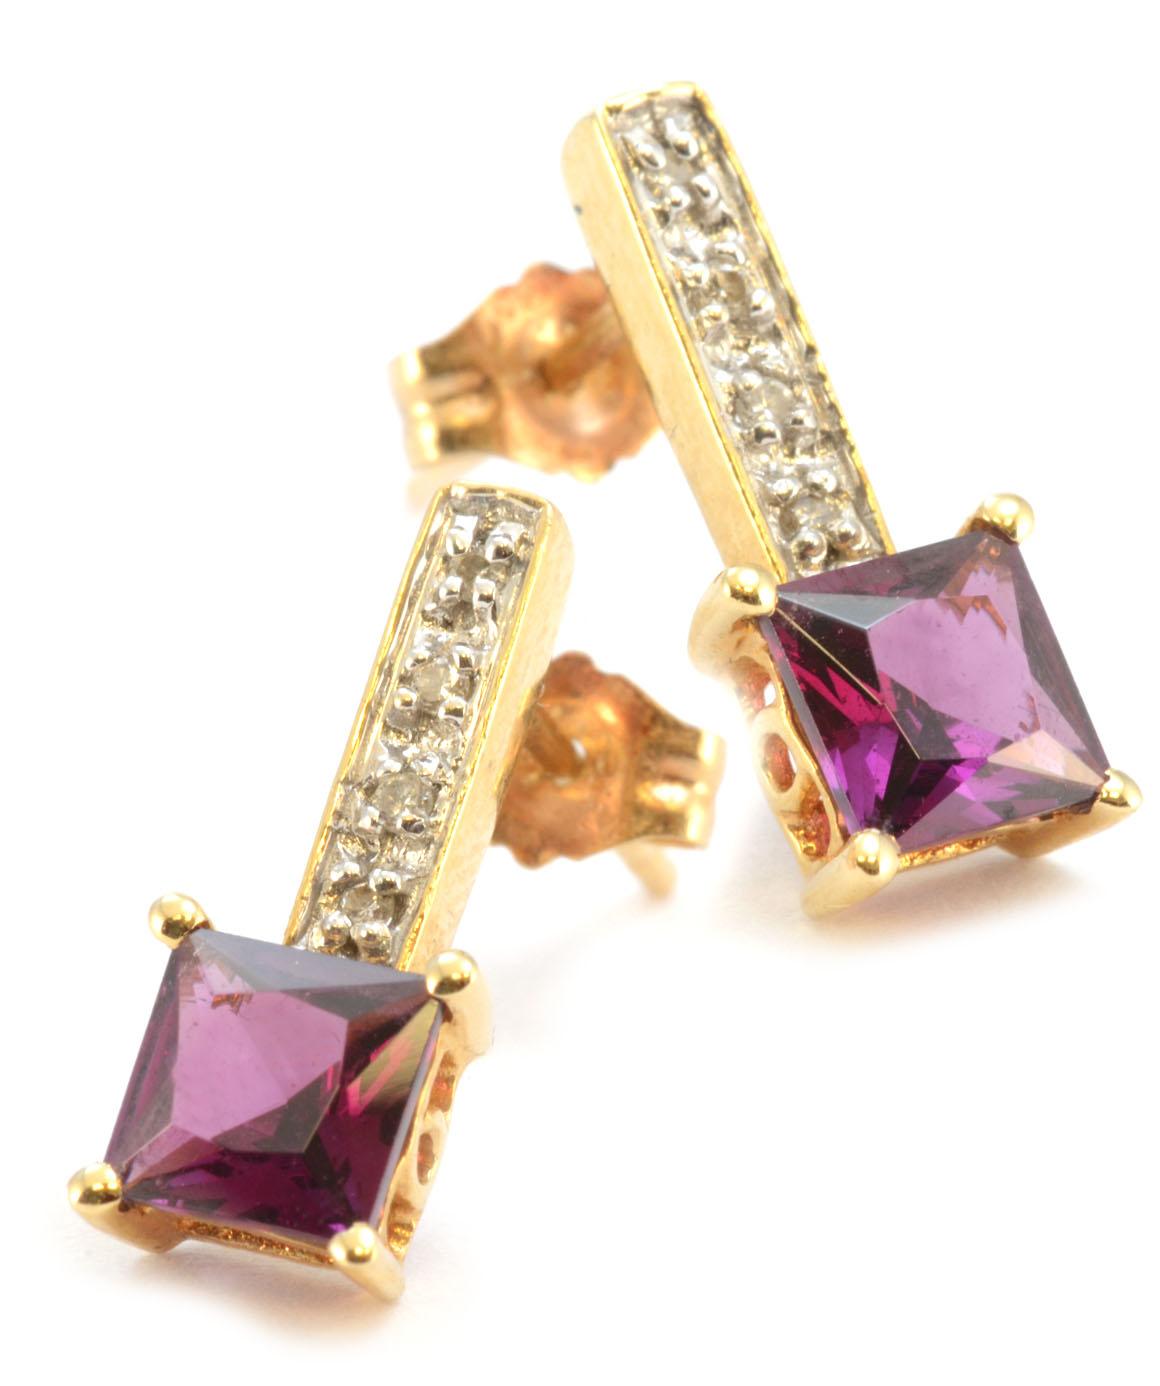 Excellent condition. These solid 14k yellow gold earrings feature a square genuine garnet in each earring. These garnets measure about 5.20mm X 5.20mm. Each earring also features 4 genuine diamonds. The earrings measure approximately 15mm X 5.20mm.